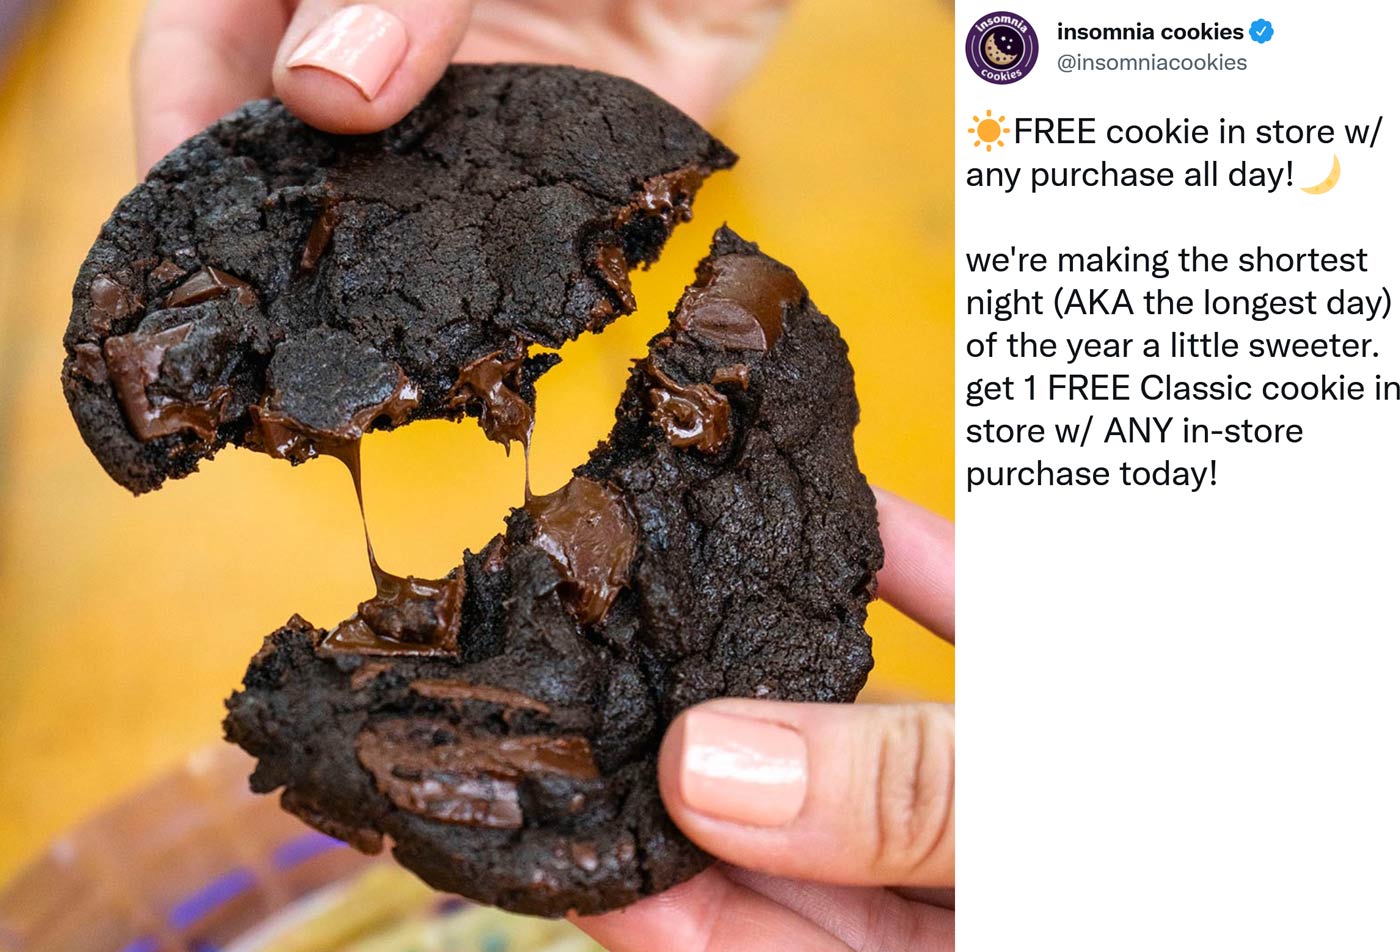 Insomnia Cookies coupons & promo code for [November 2022]